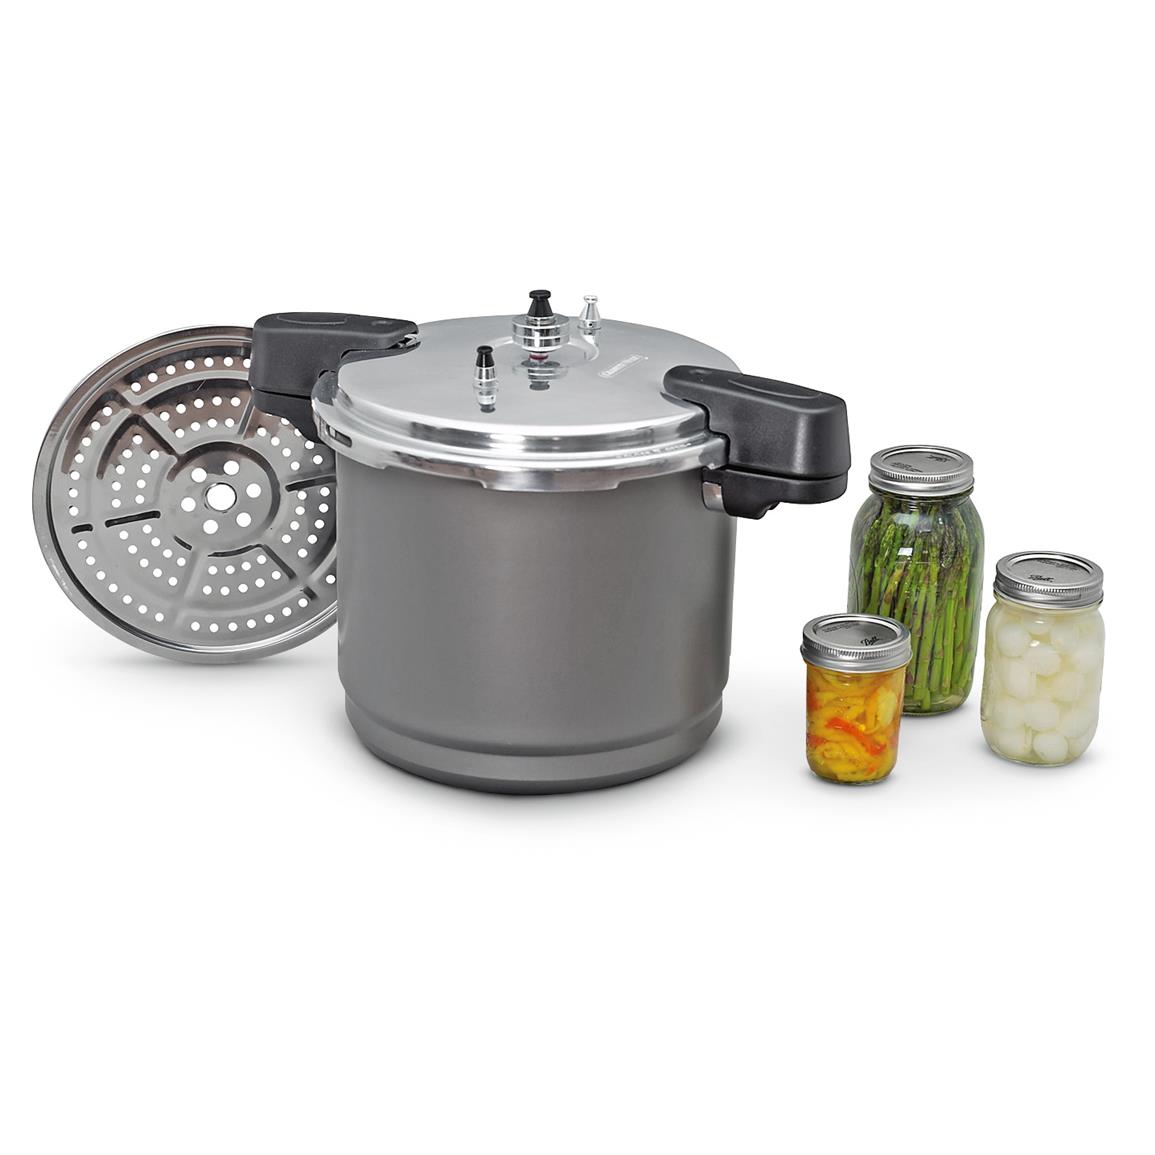 Electric pressure cooker canner